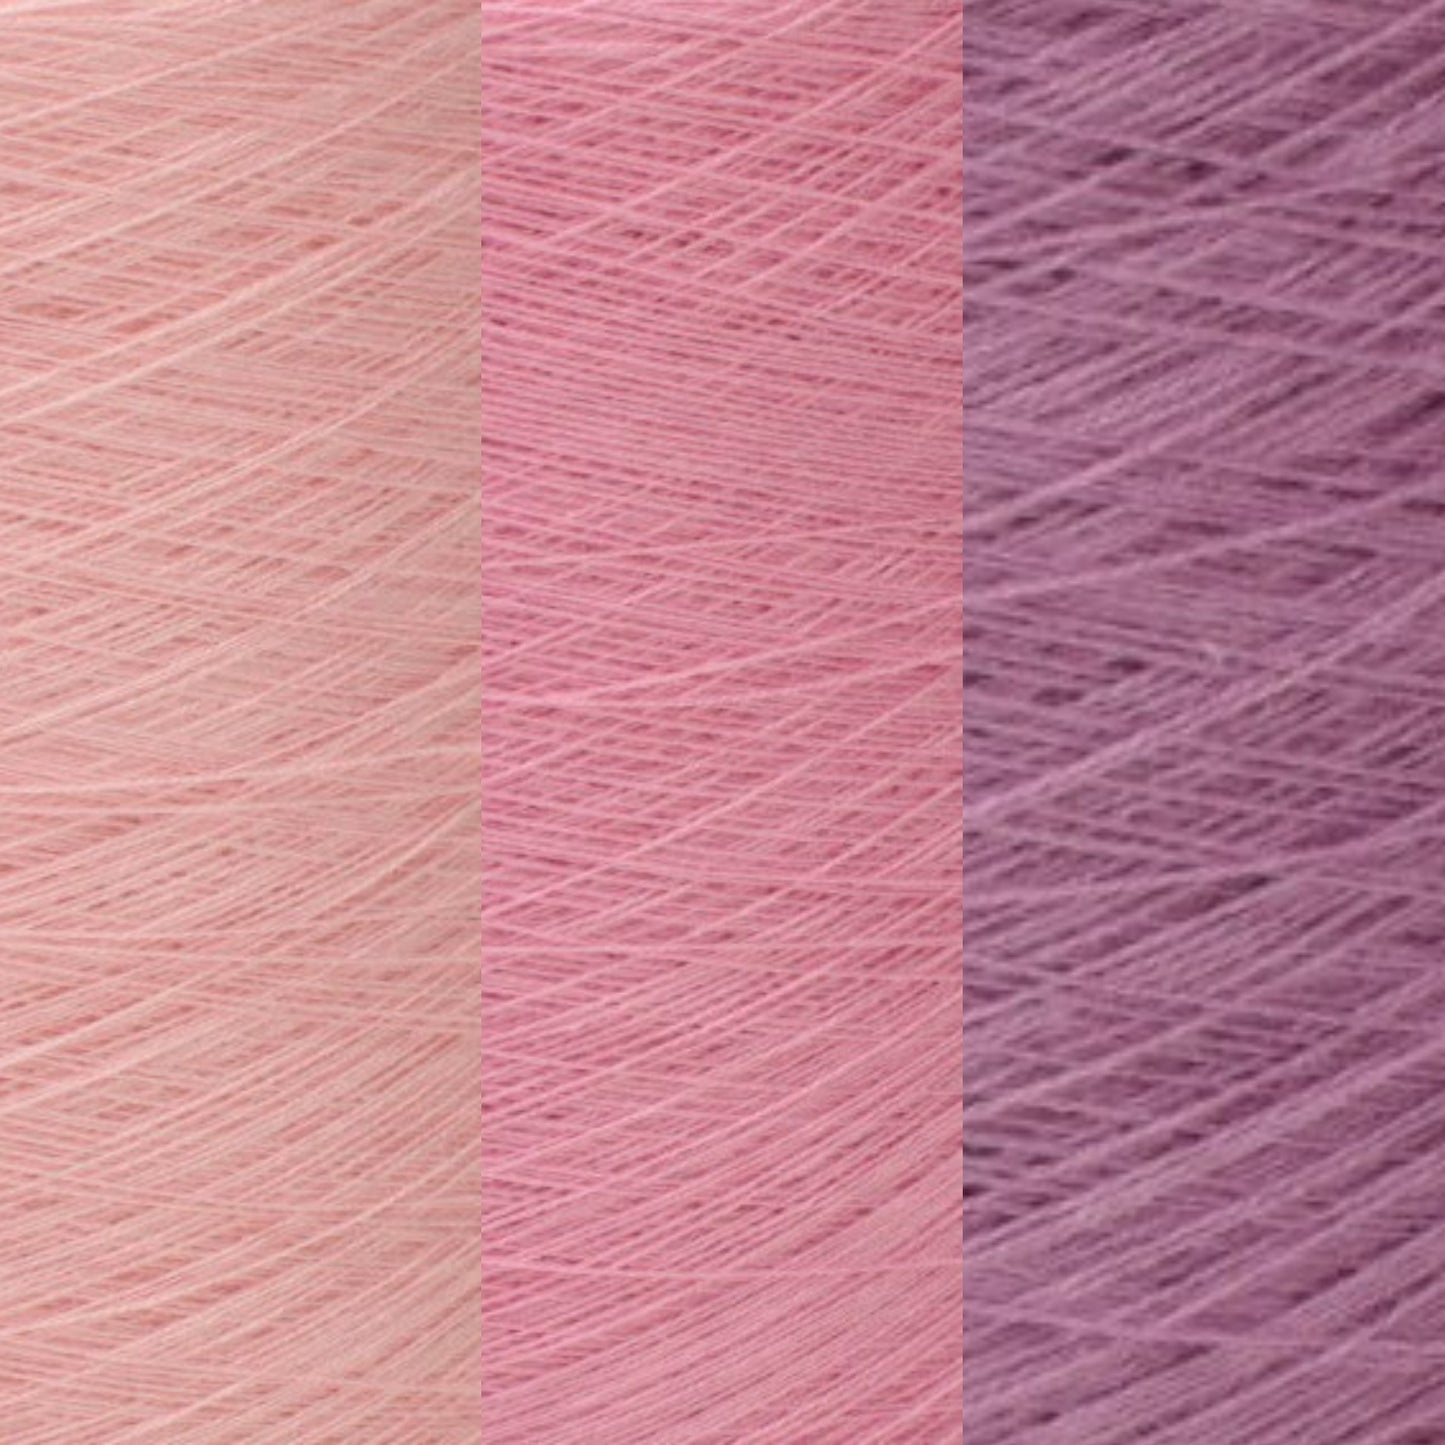 C328 cotton/acrylic ombre yarn cake, normal style, 210g, about 1050m, 3ply